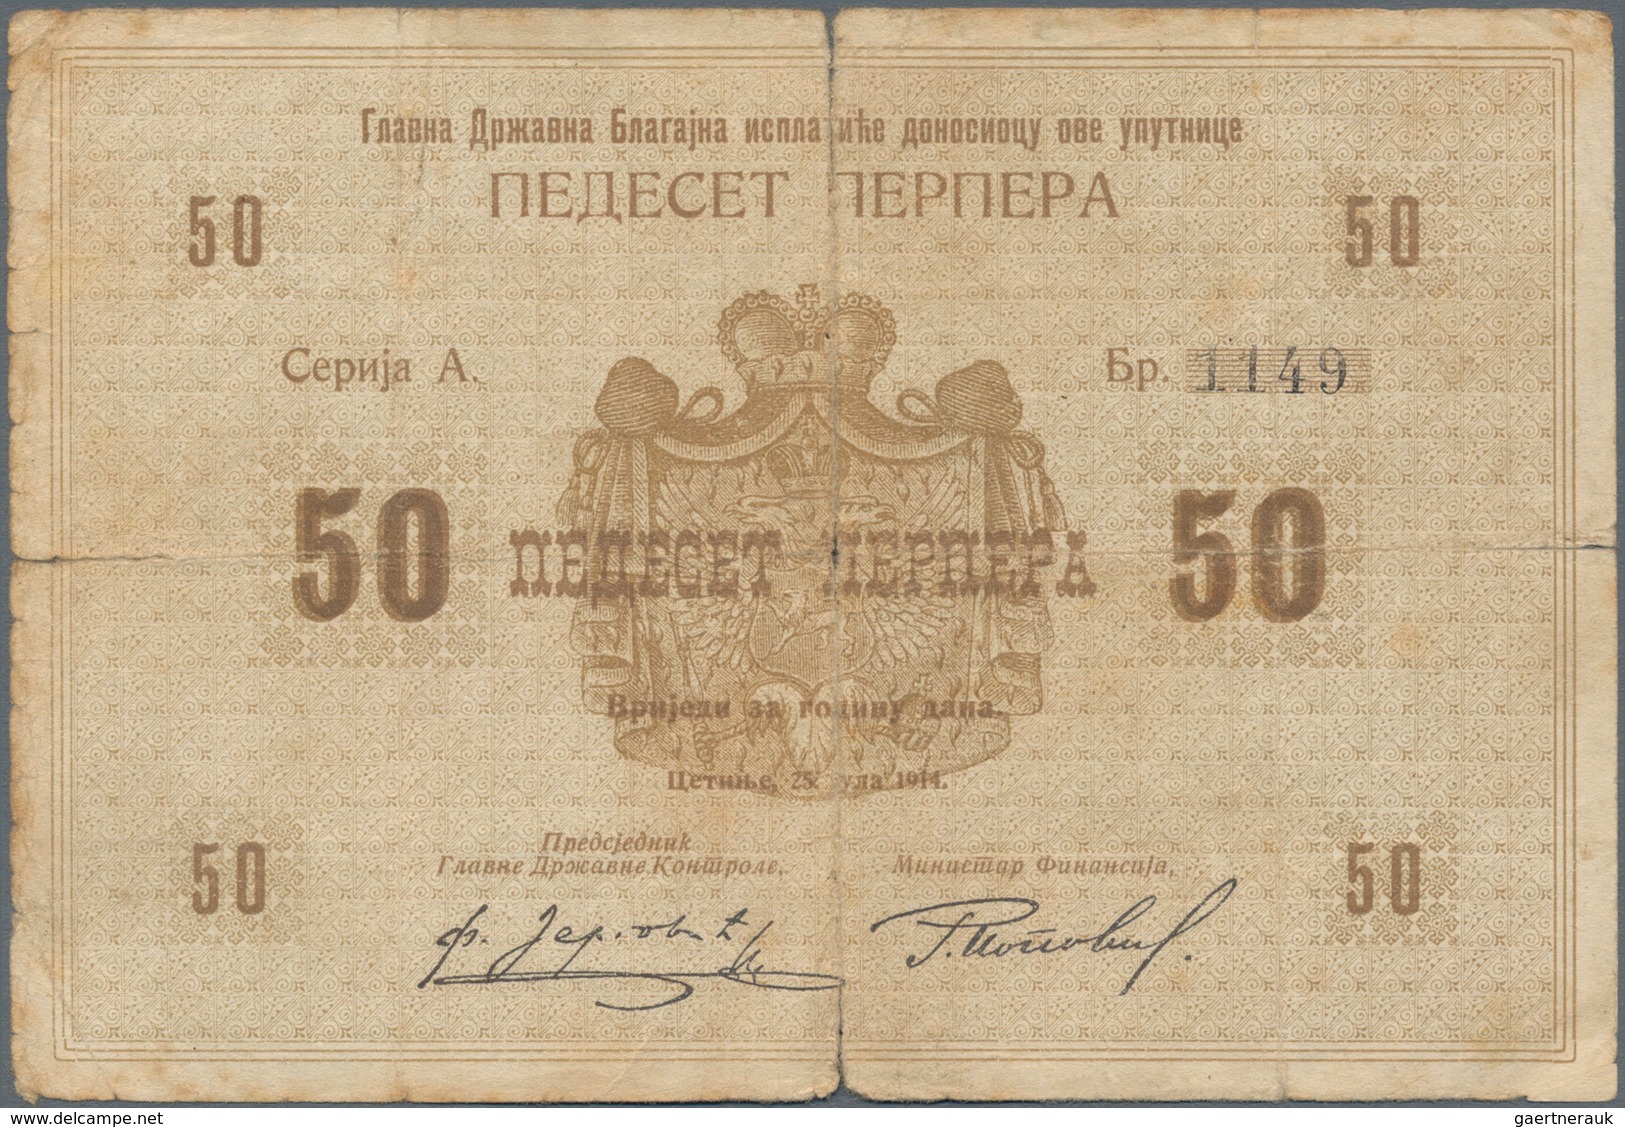 Montenegro: Nice lot with 4 banknotes of the 25.07.1914 "Large Arms on Front and Back" issue with 5